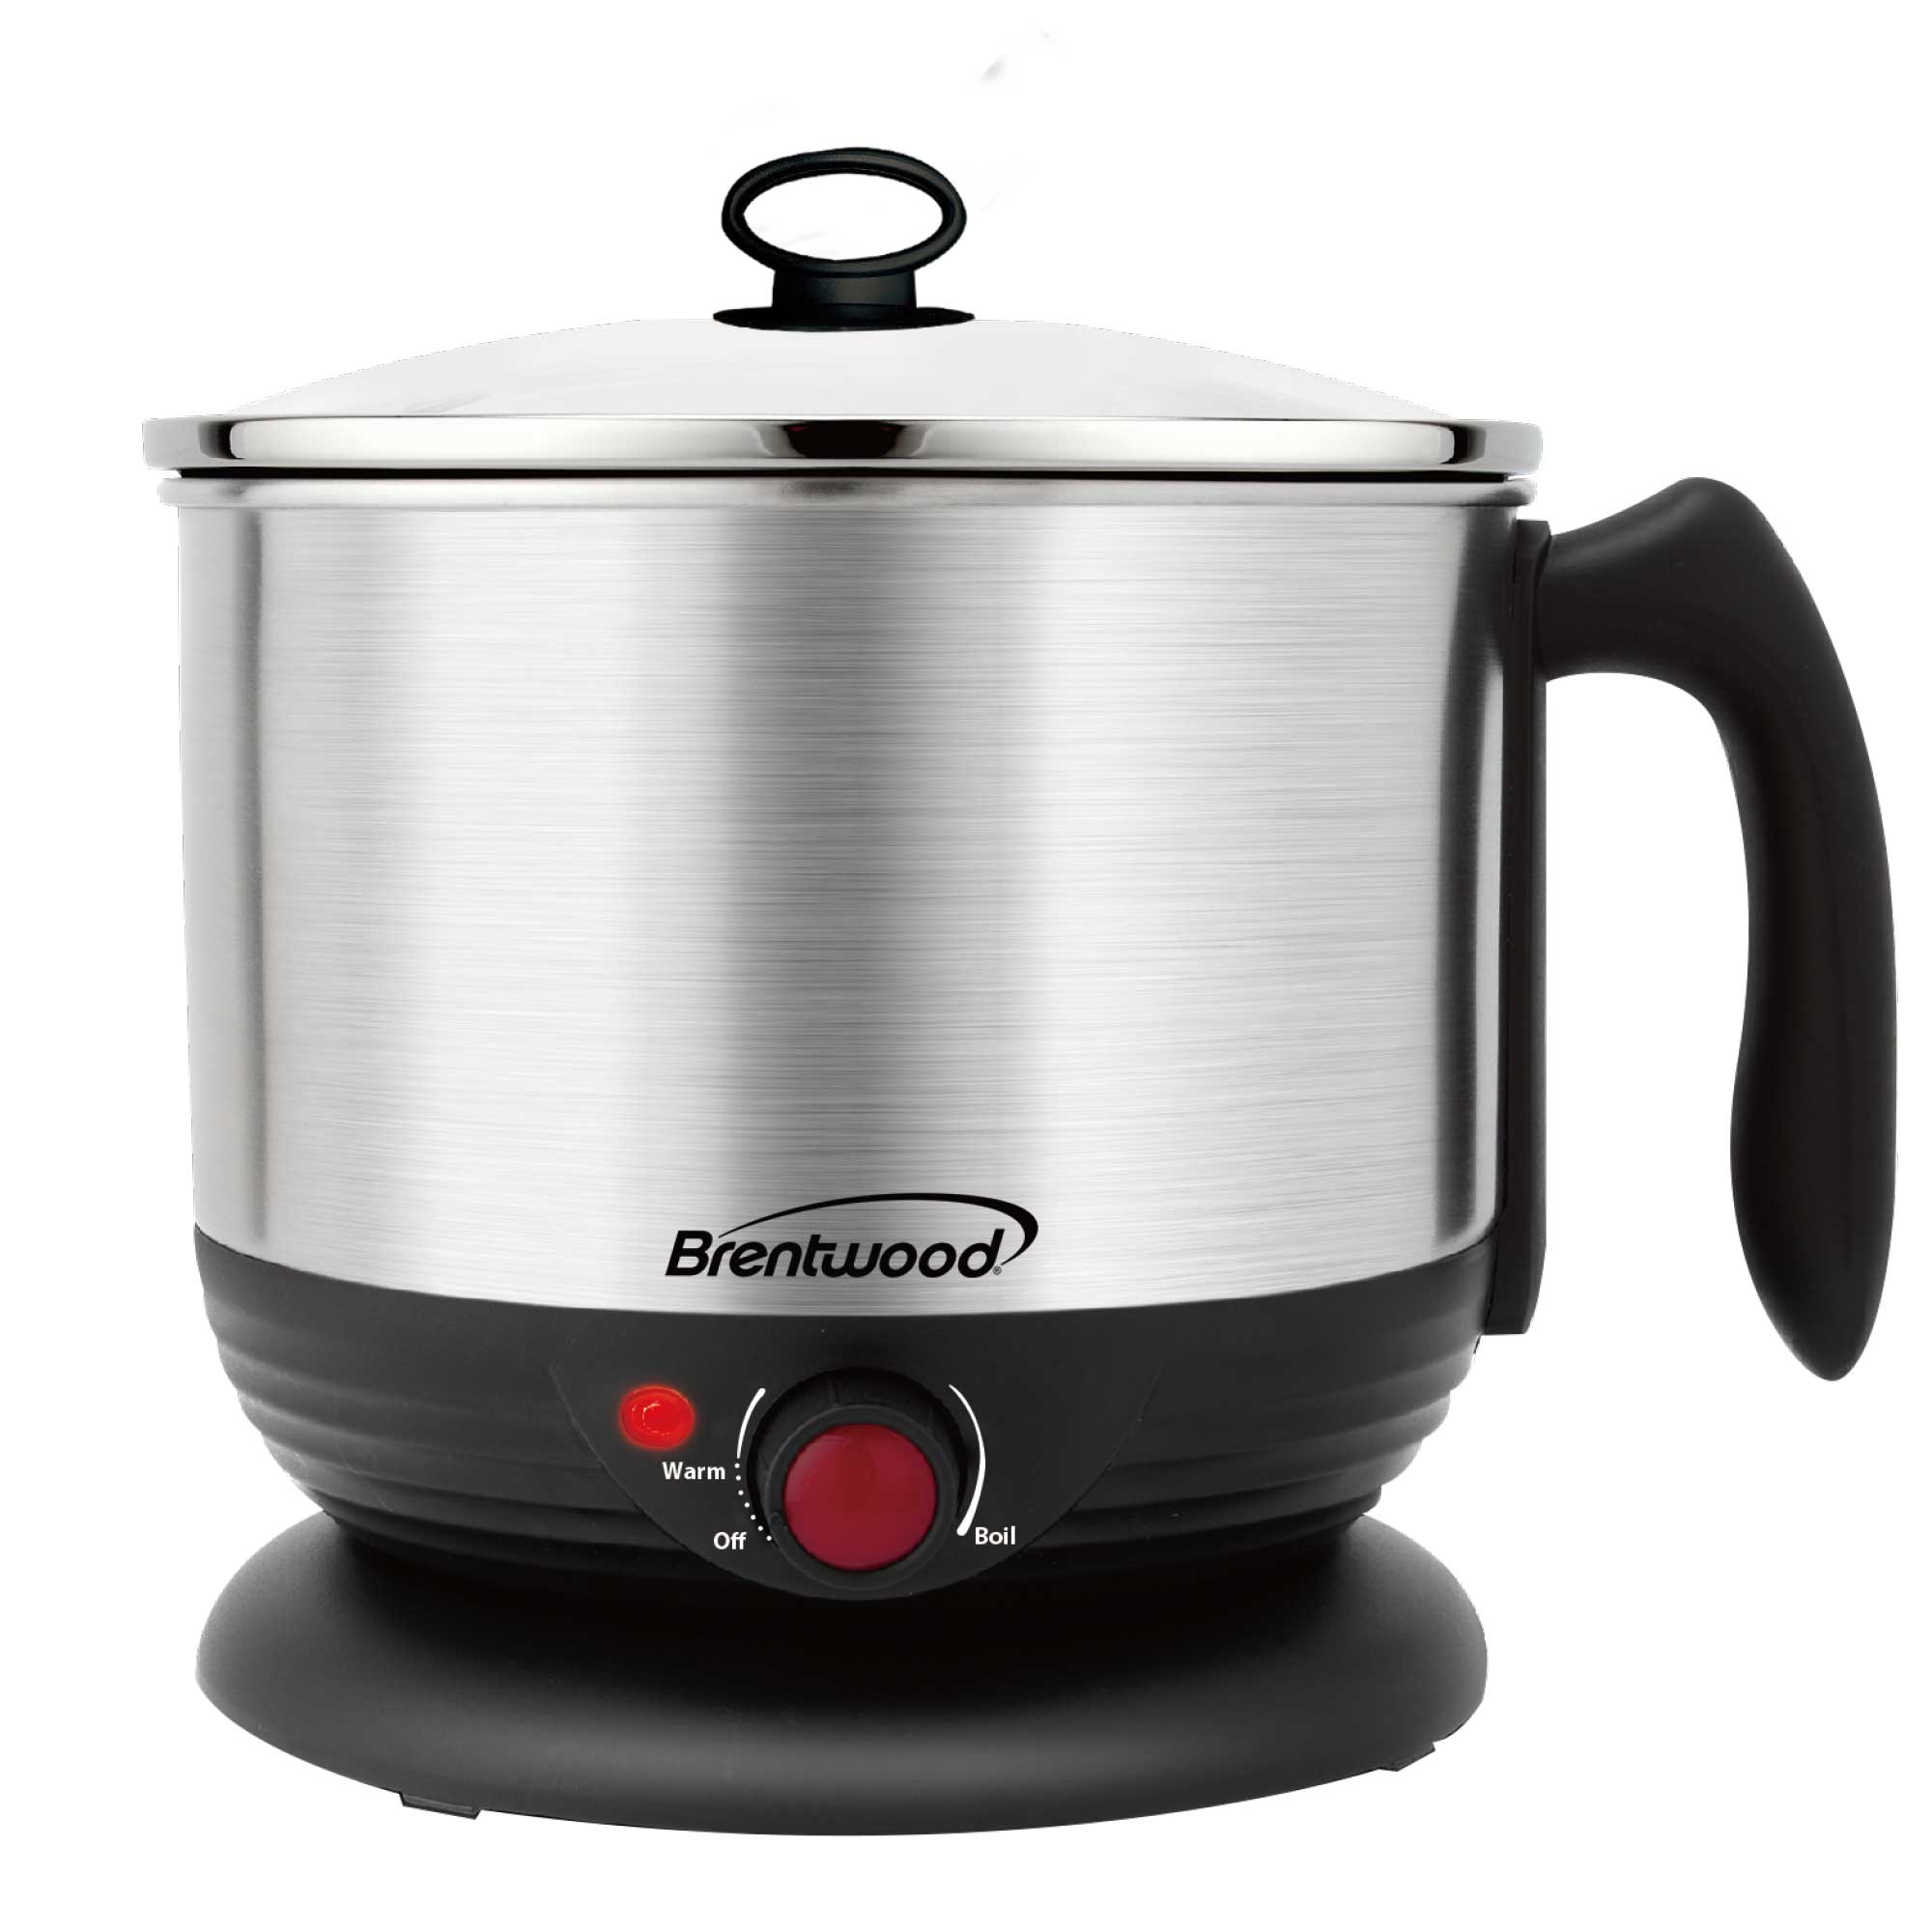 Brentwood HP-3013BK 1.3-Quart Stainless Steel Cordless Electric